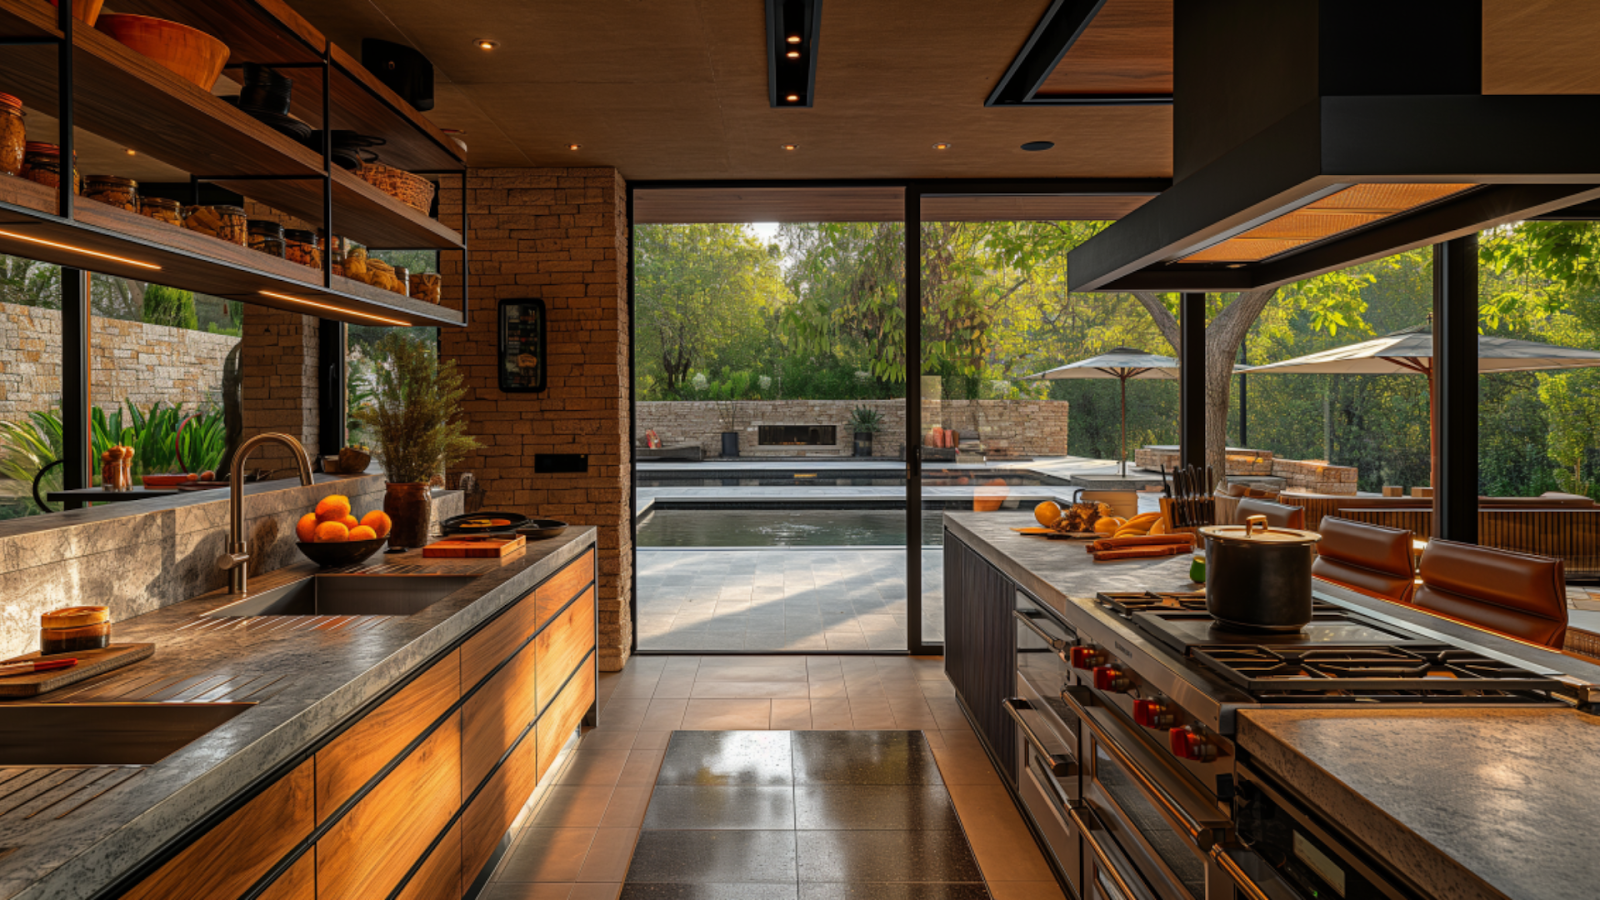 A gourmet kitchen in a Croatian luxury villa, equipped with modern appliances.